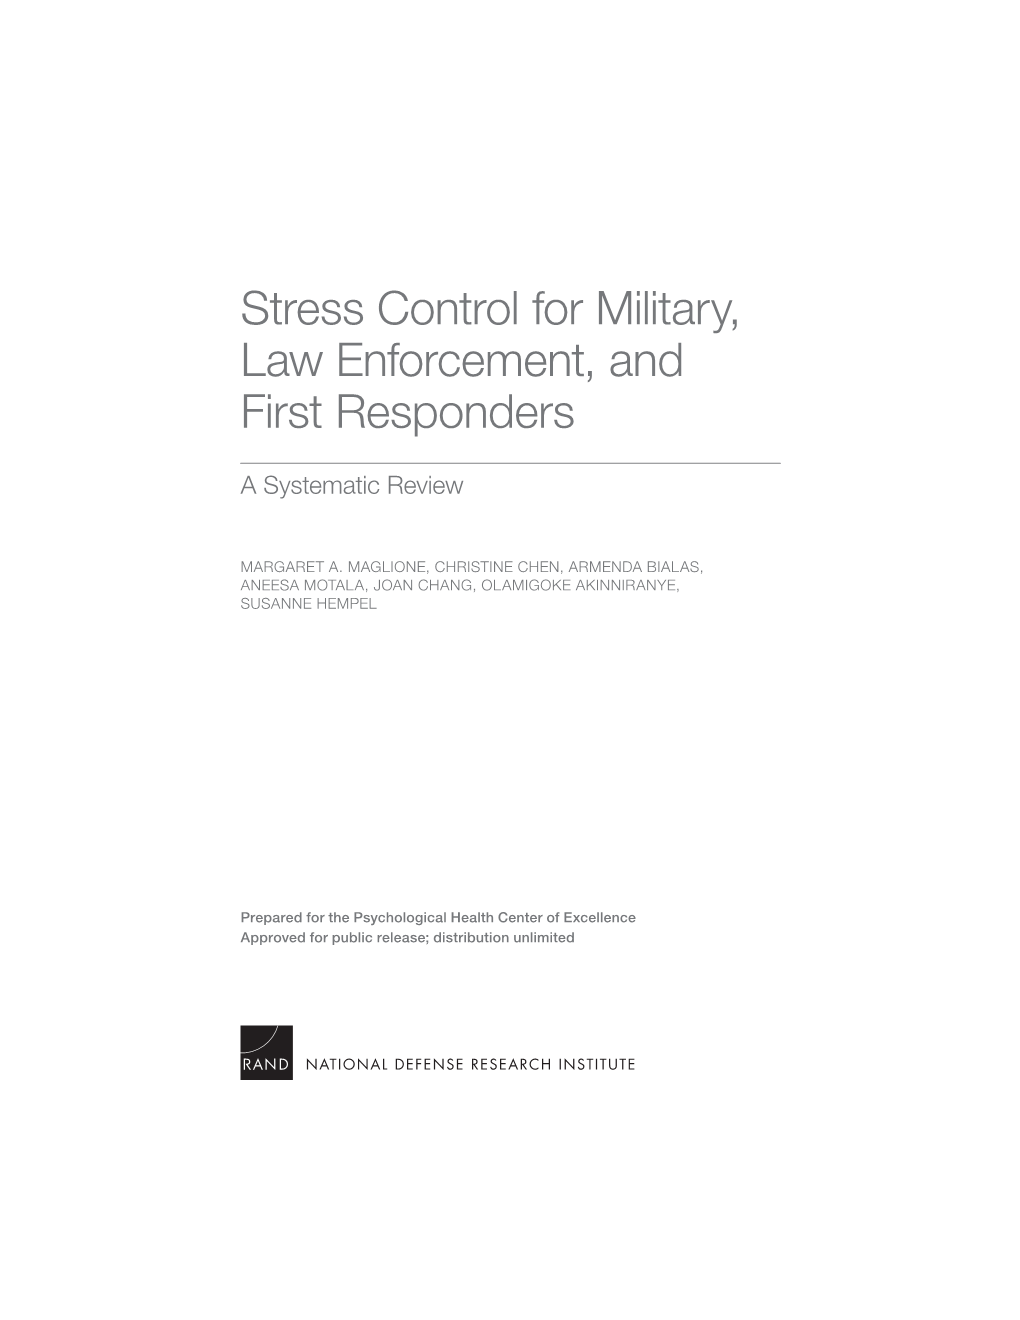 Stress Control for Military, Law Enforcement, and First Responders